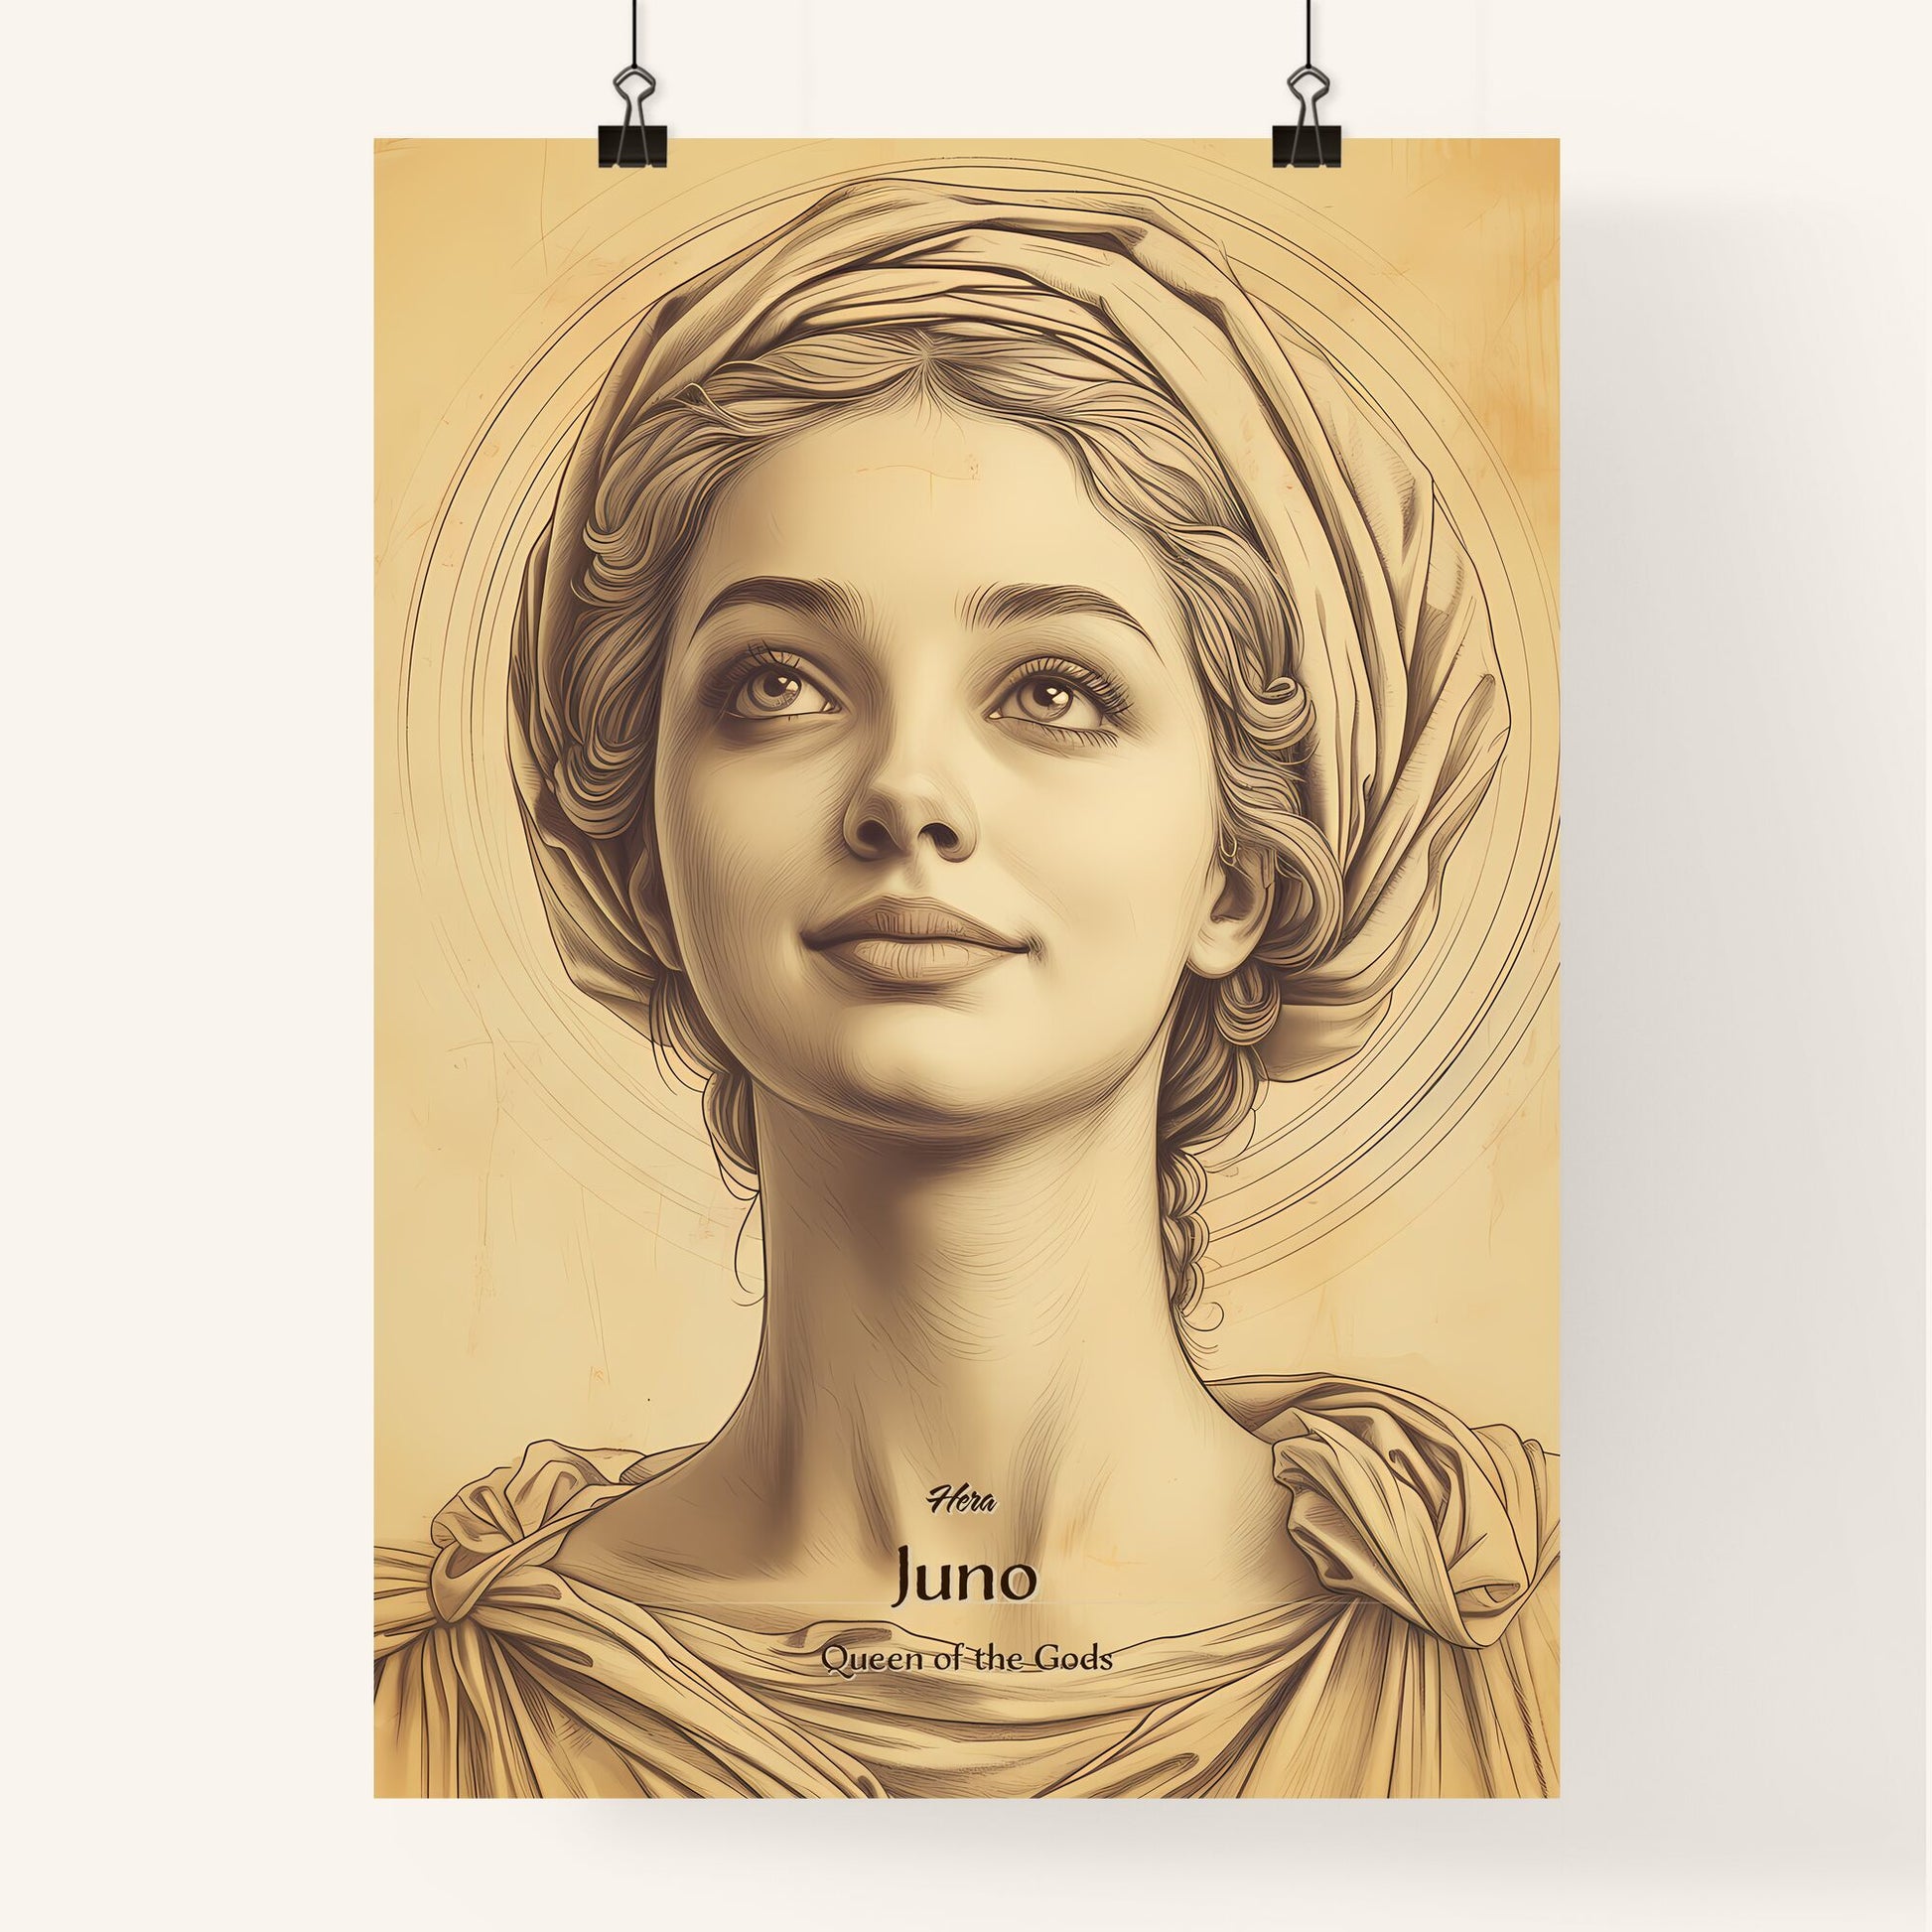 Hera, Juno, Queen of the Gods, A Poster of a drawing of a woman Default Title